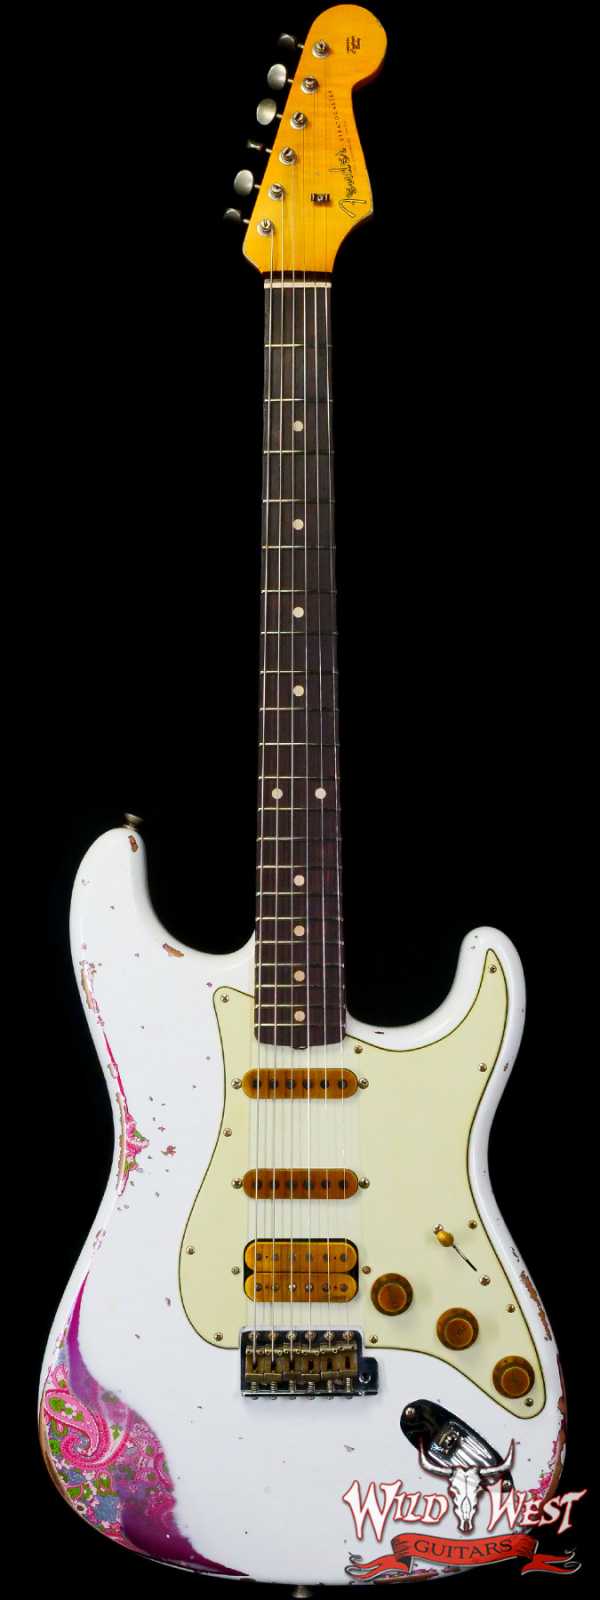 Fender Custom Shop Wild West White Lightning 2.0 Stratocaster HSS Rosewood Board 21 Frets Heavy Relic Pink Paisley